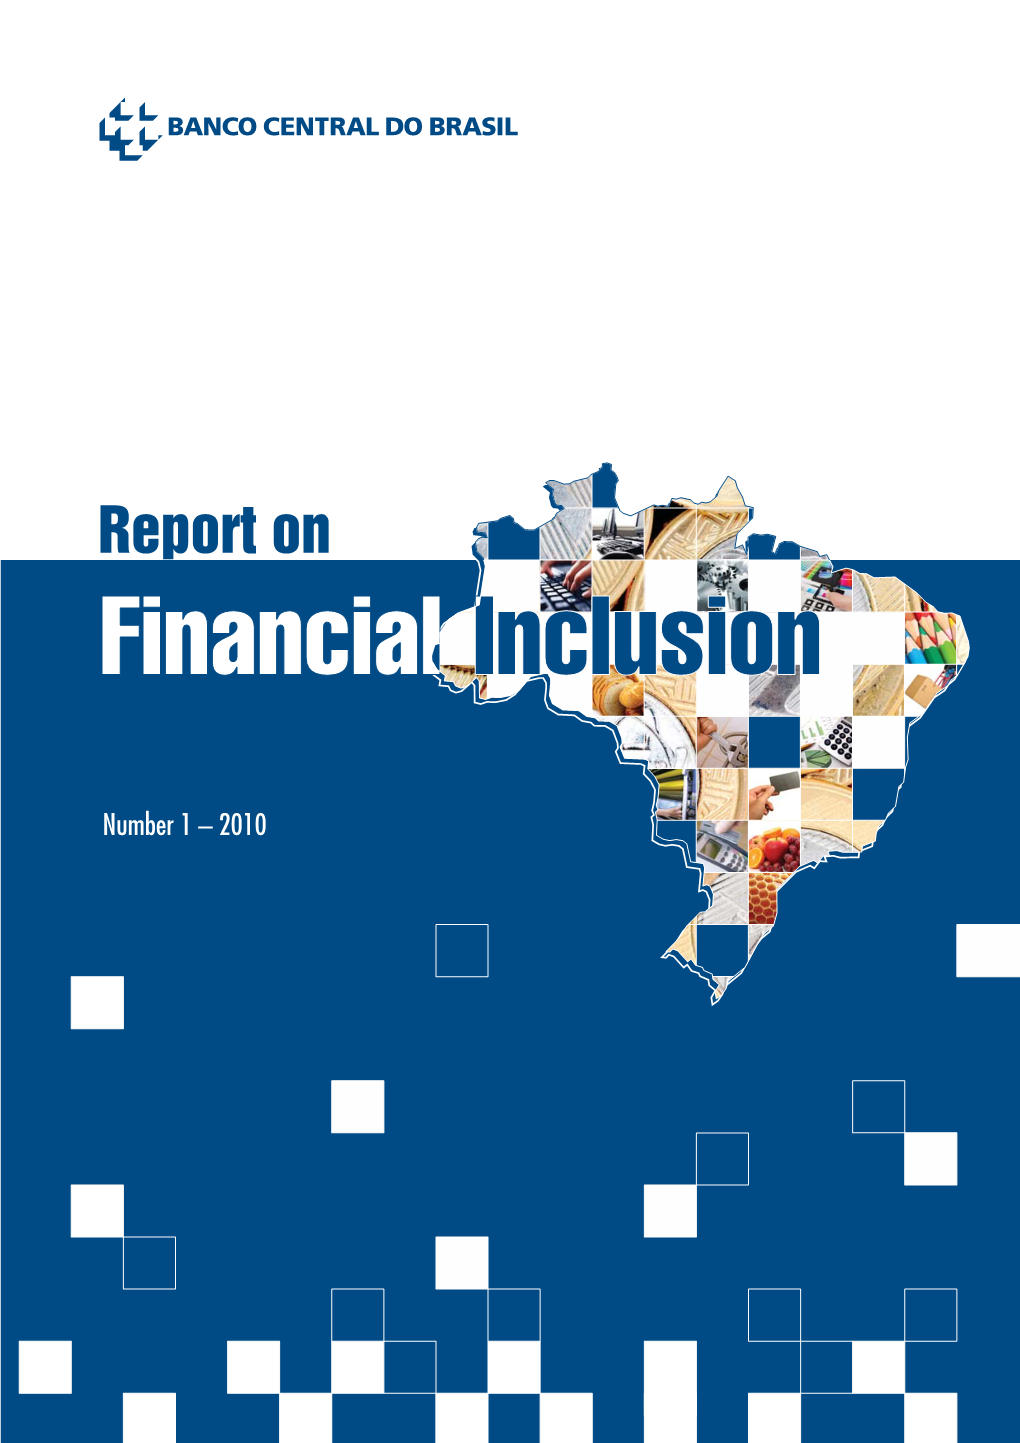 Report on Financial Inclusion – Number 1